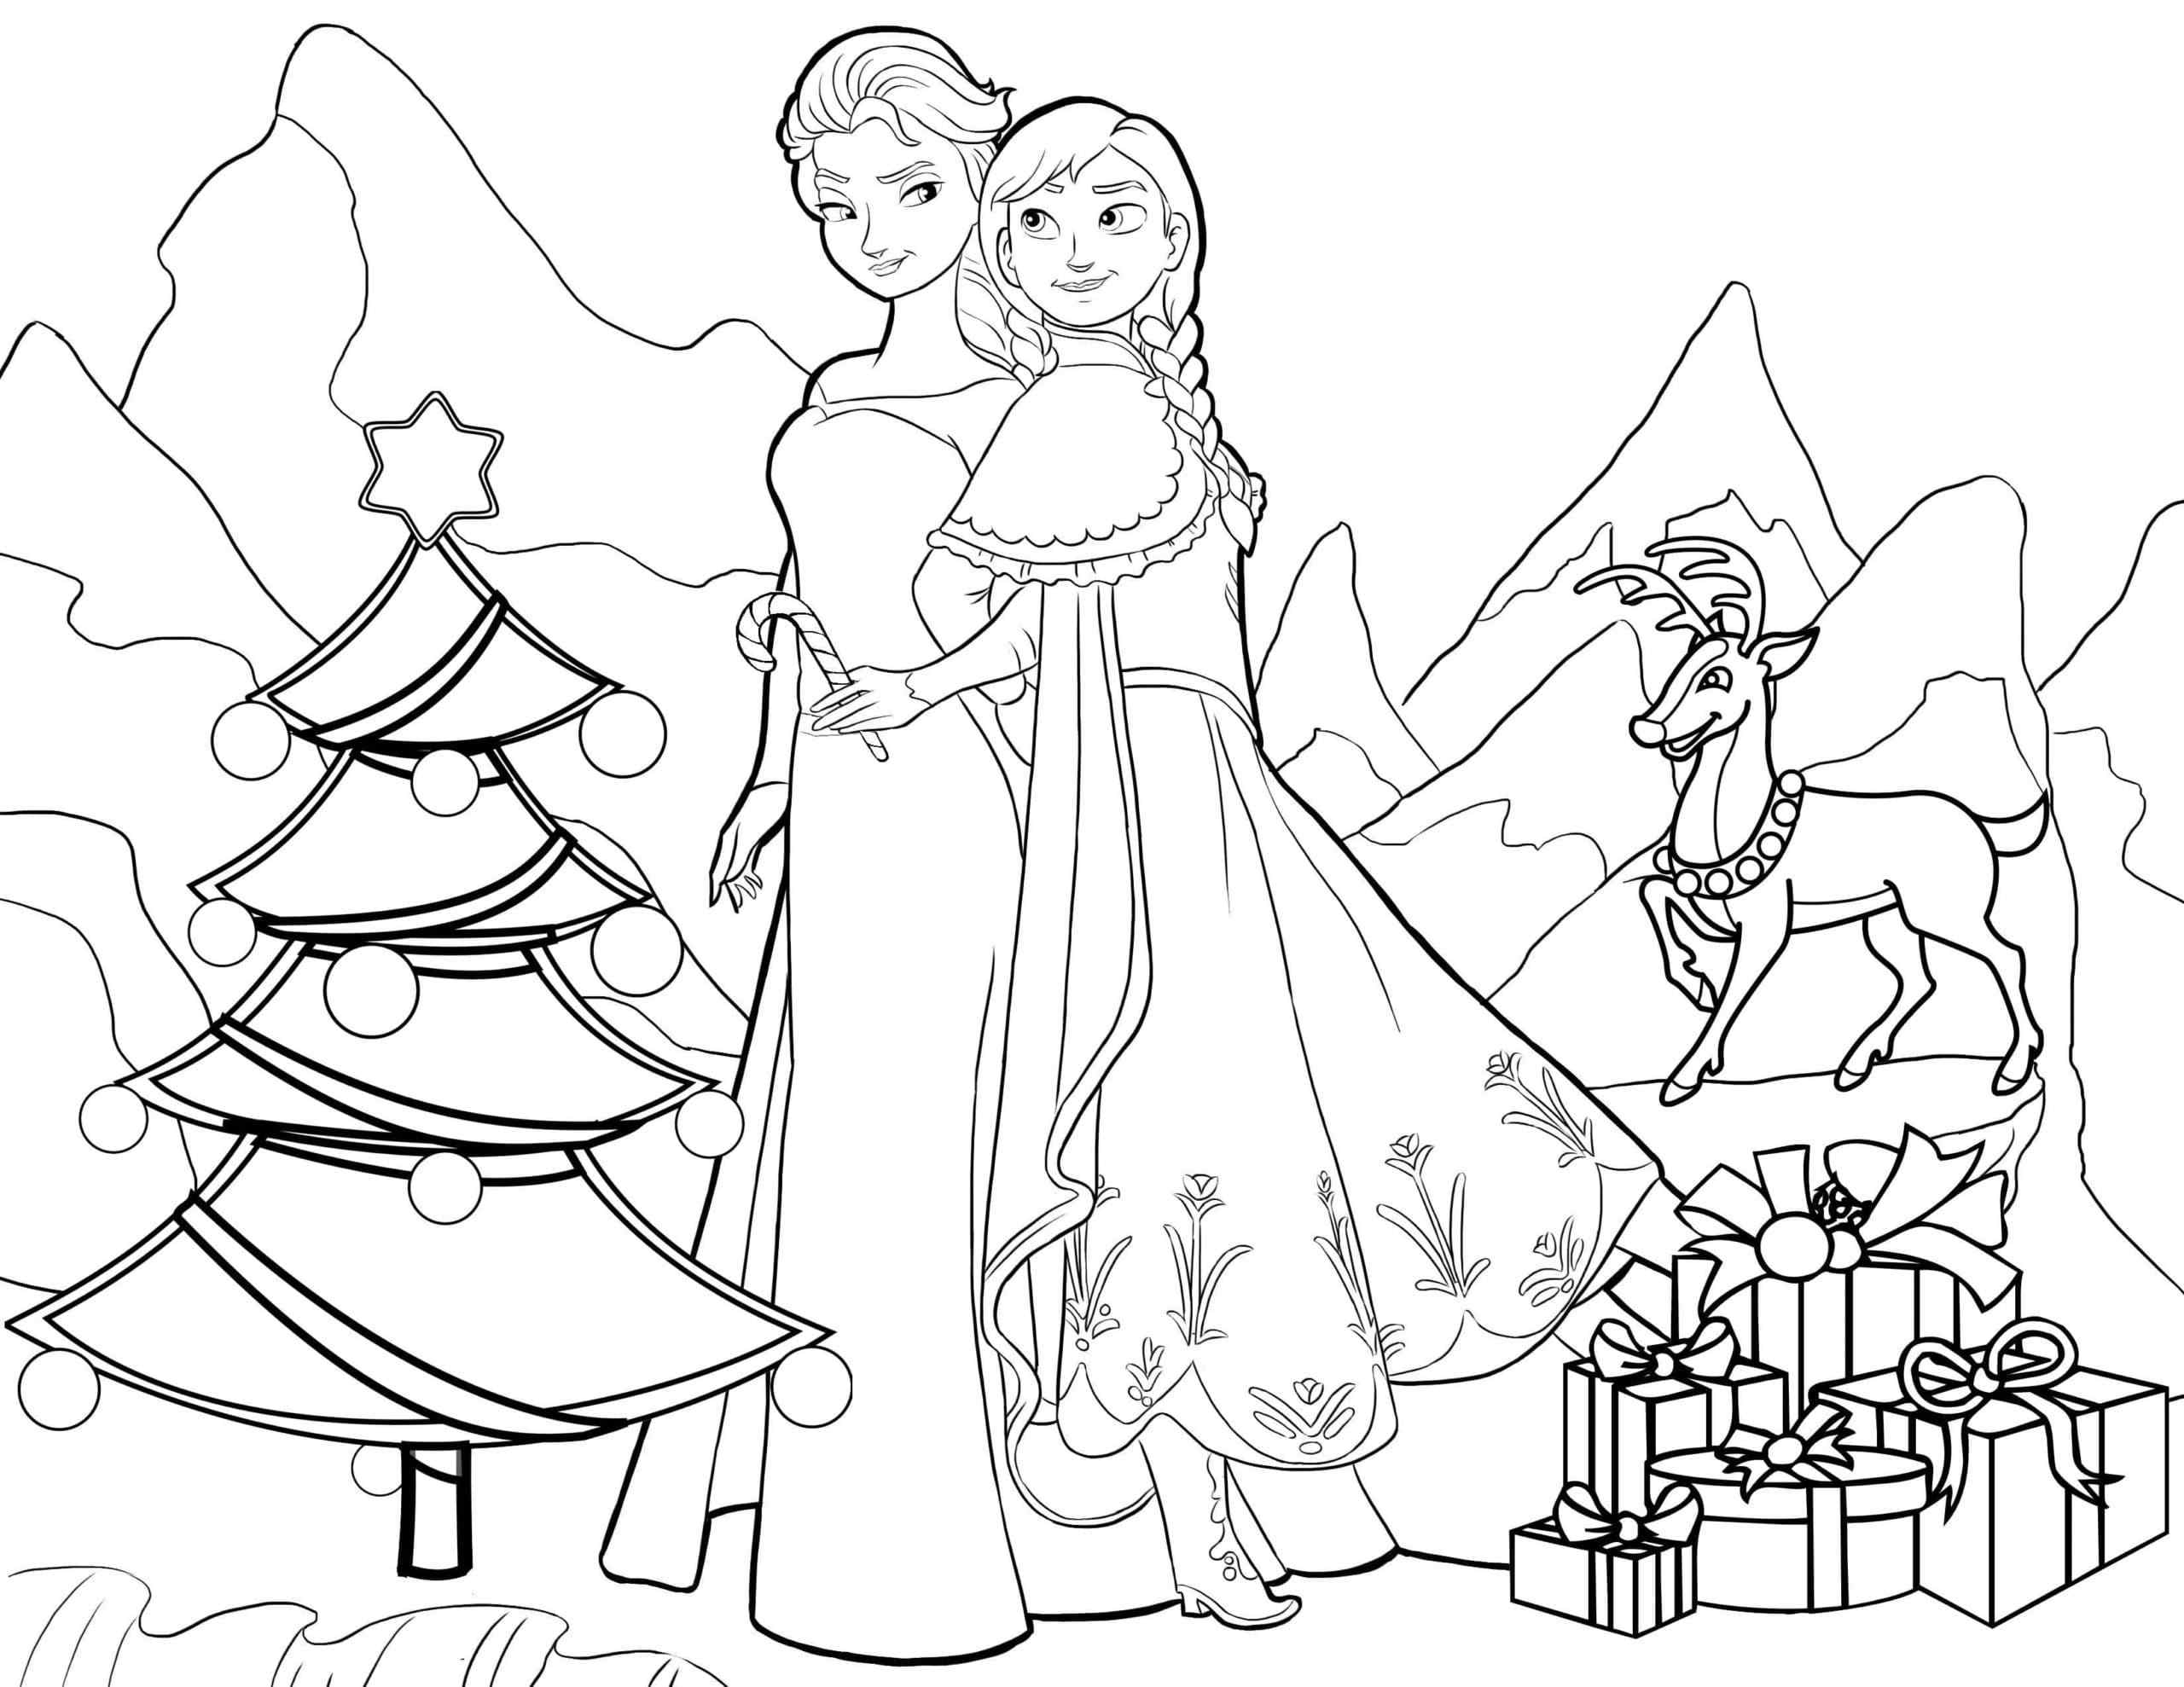 Anna And Elsa In A Snowy Christmas Tale Coloring Page